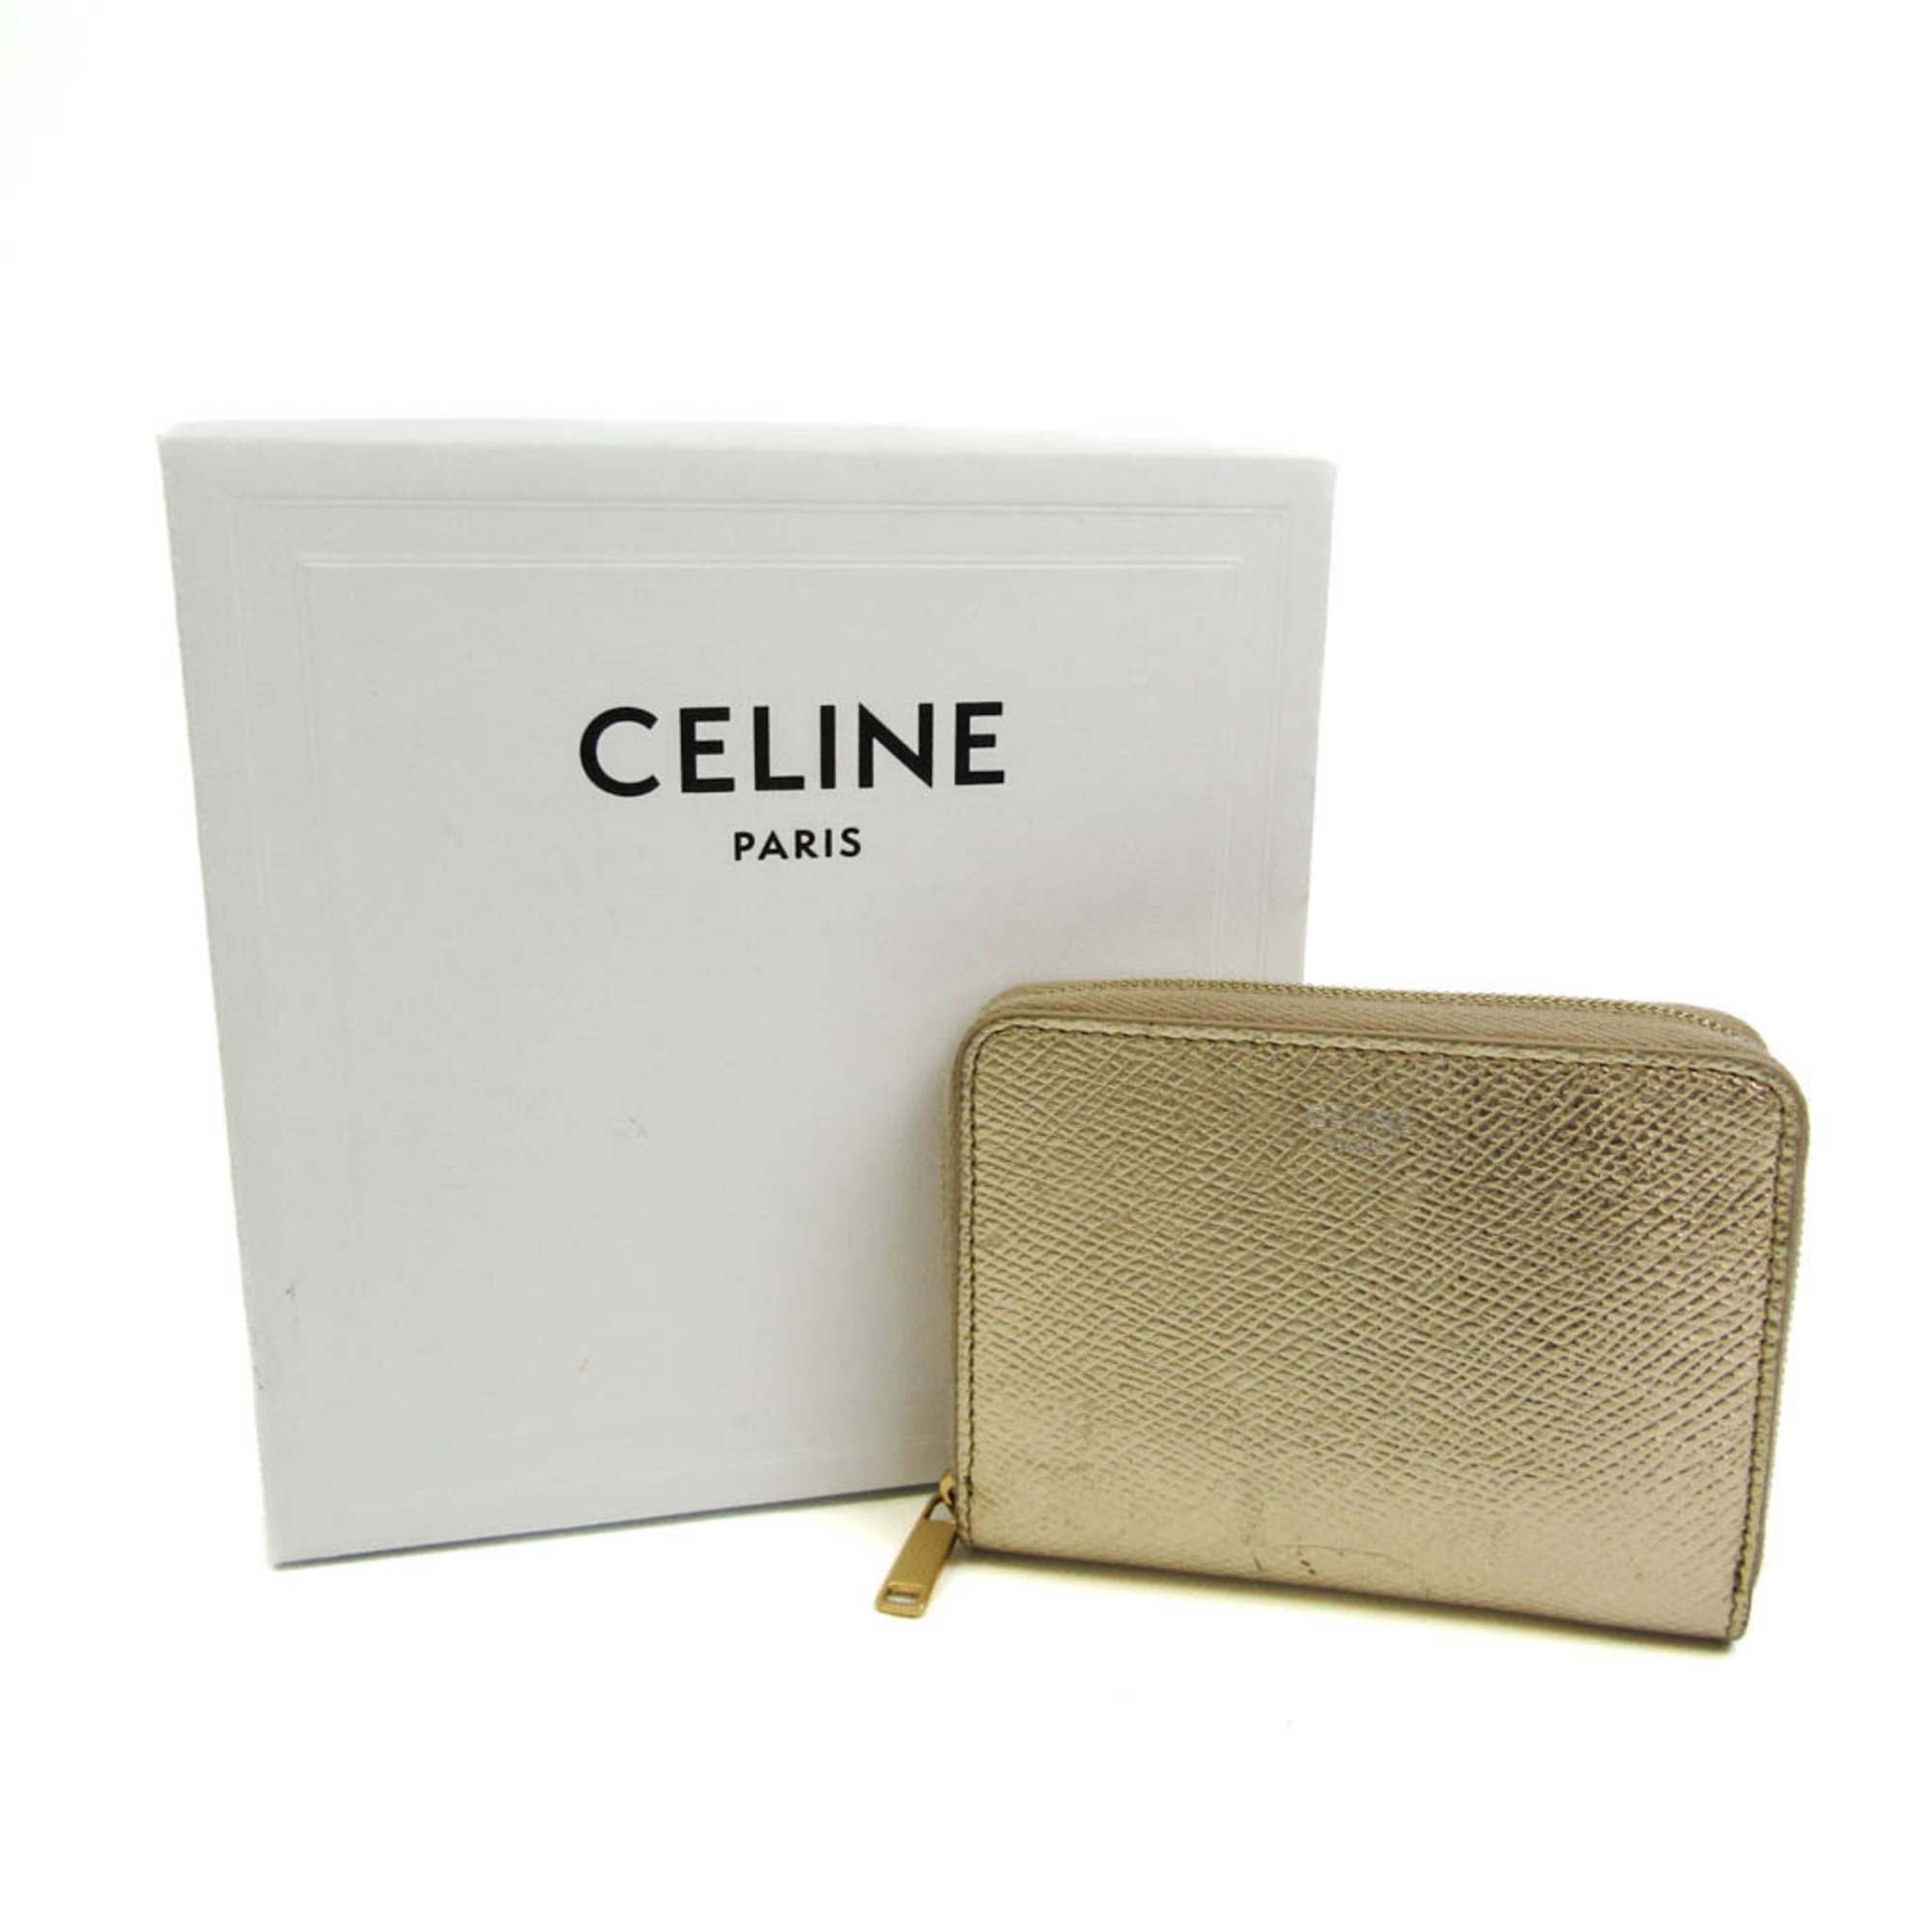 Celine Compact Zip Wallet 10B663 Leather Card Case Gold